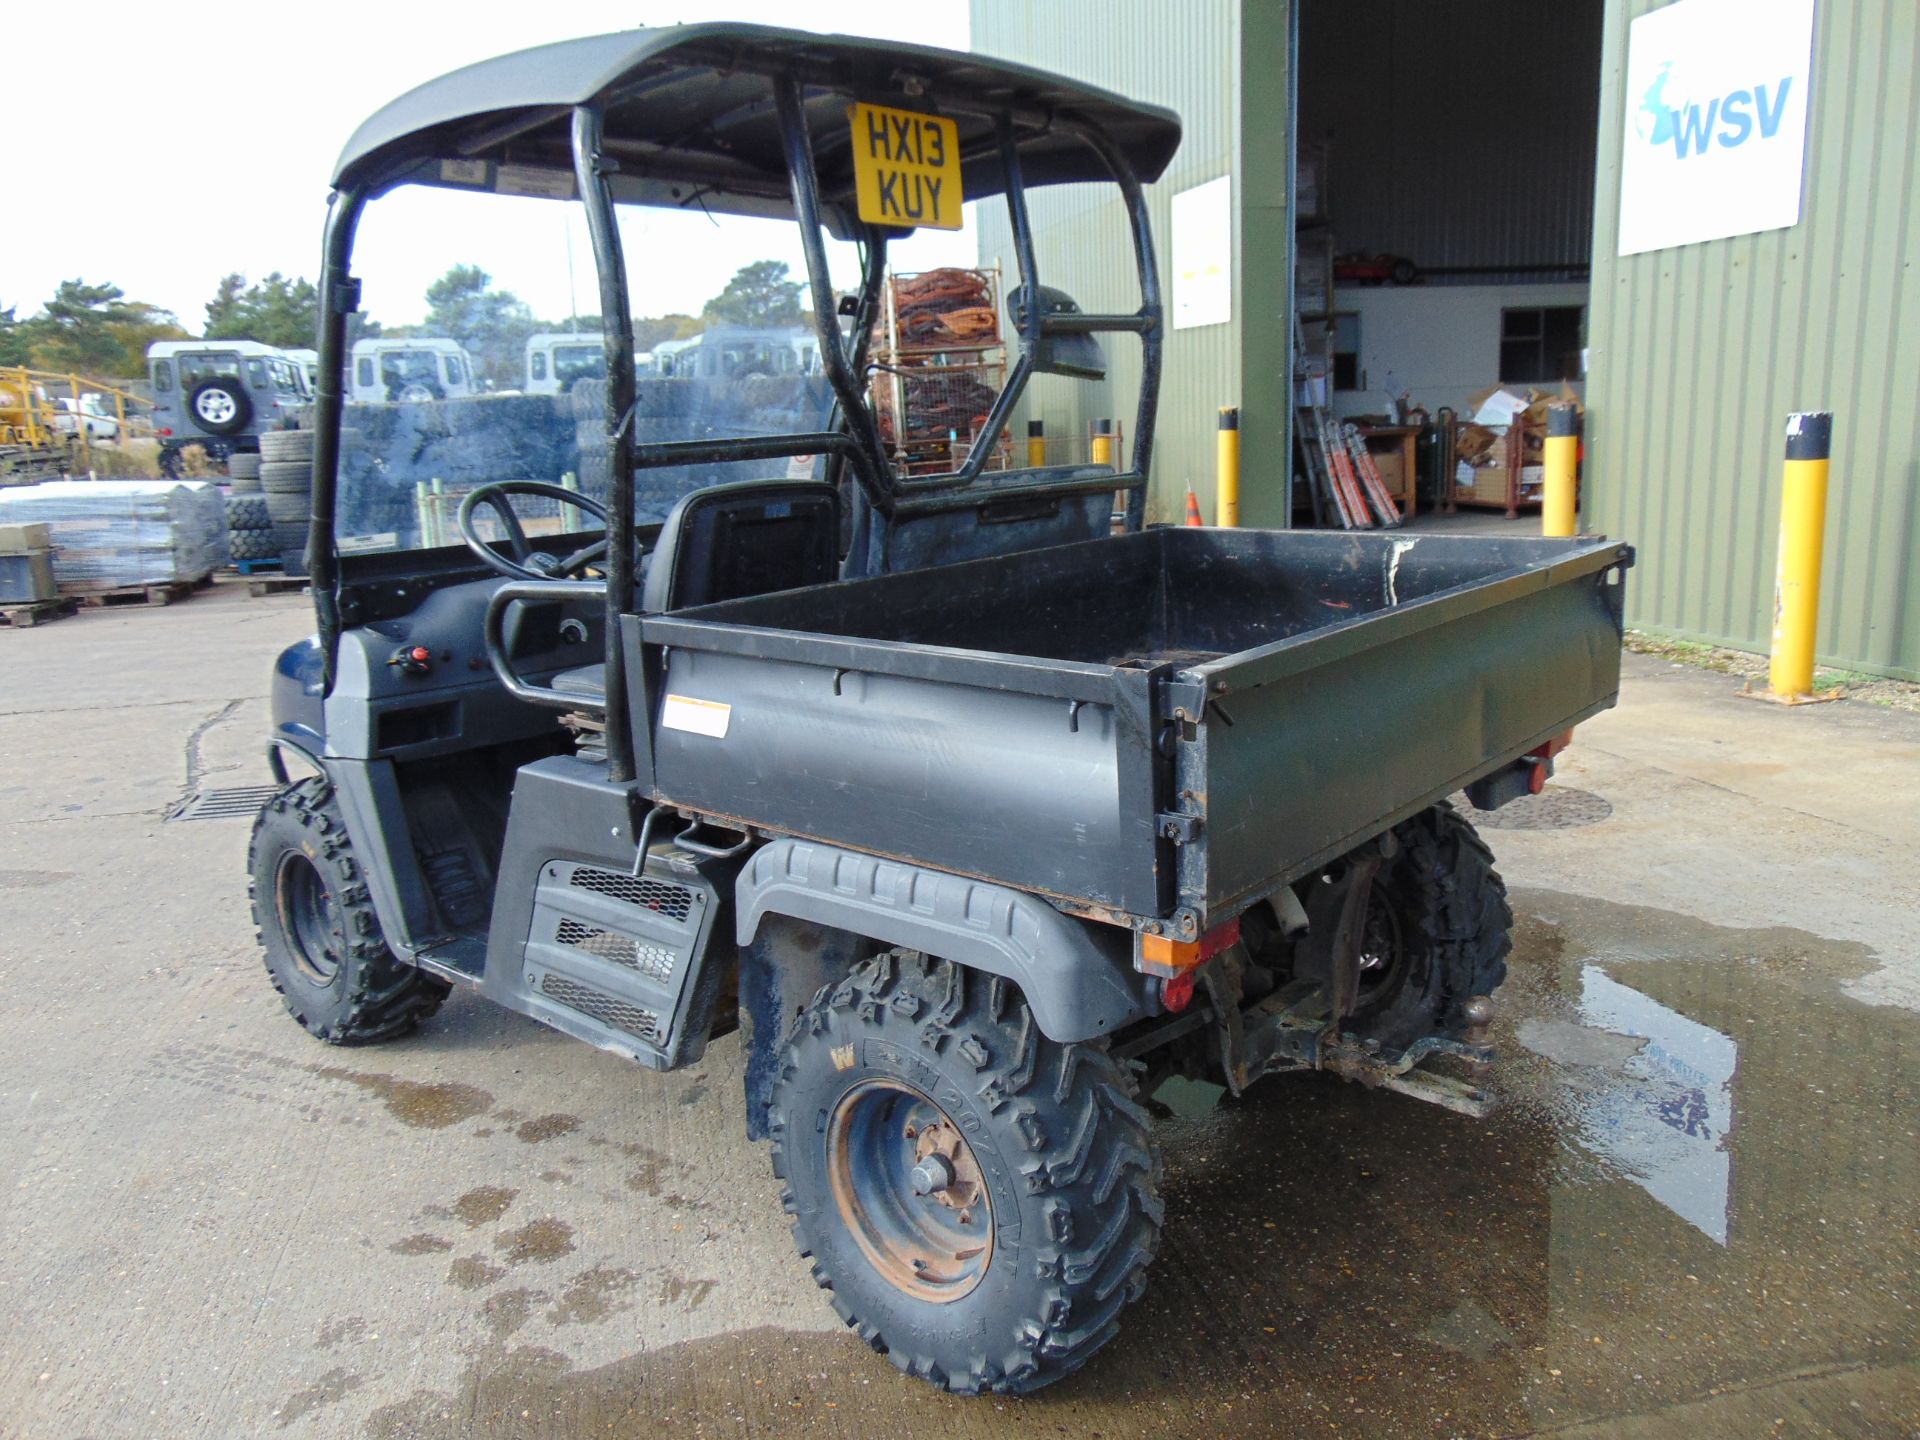 2013 Cushman XD1600 4x4 Diesel Utility Vehicle Showing 217 hrs - Image 10 of 17